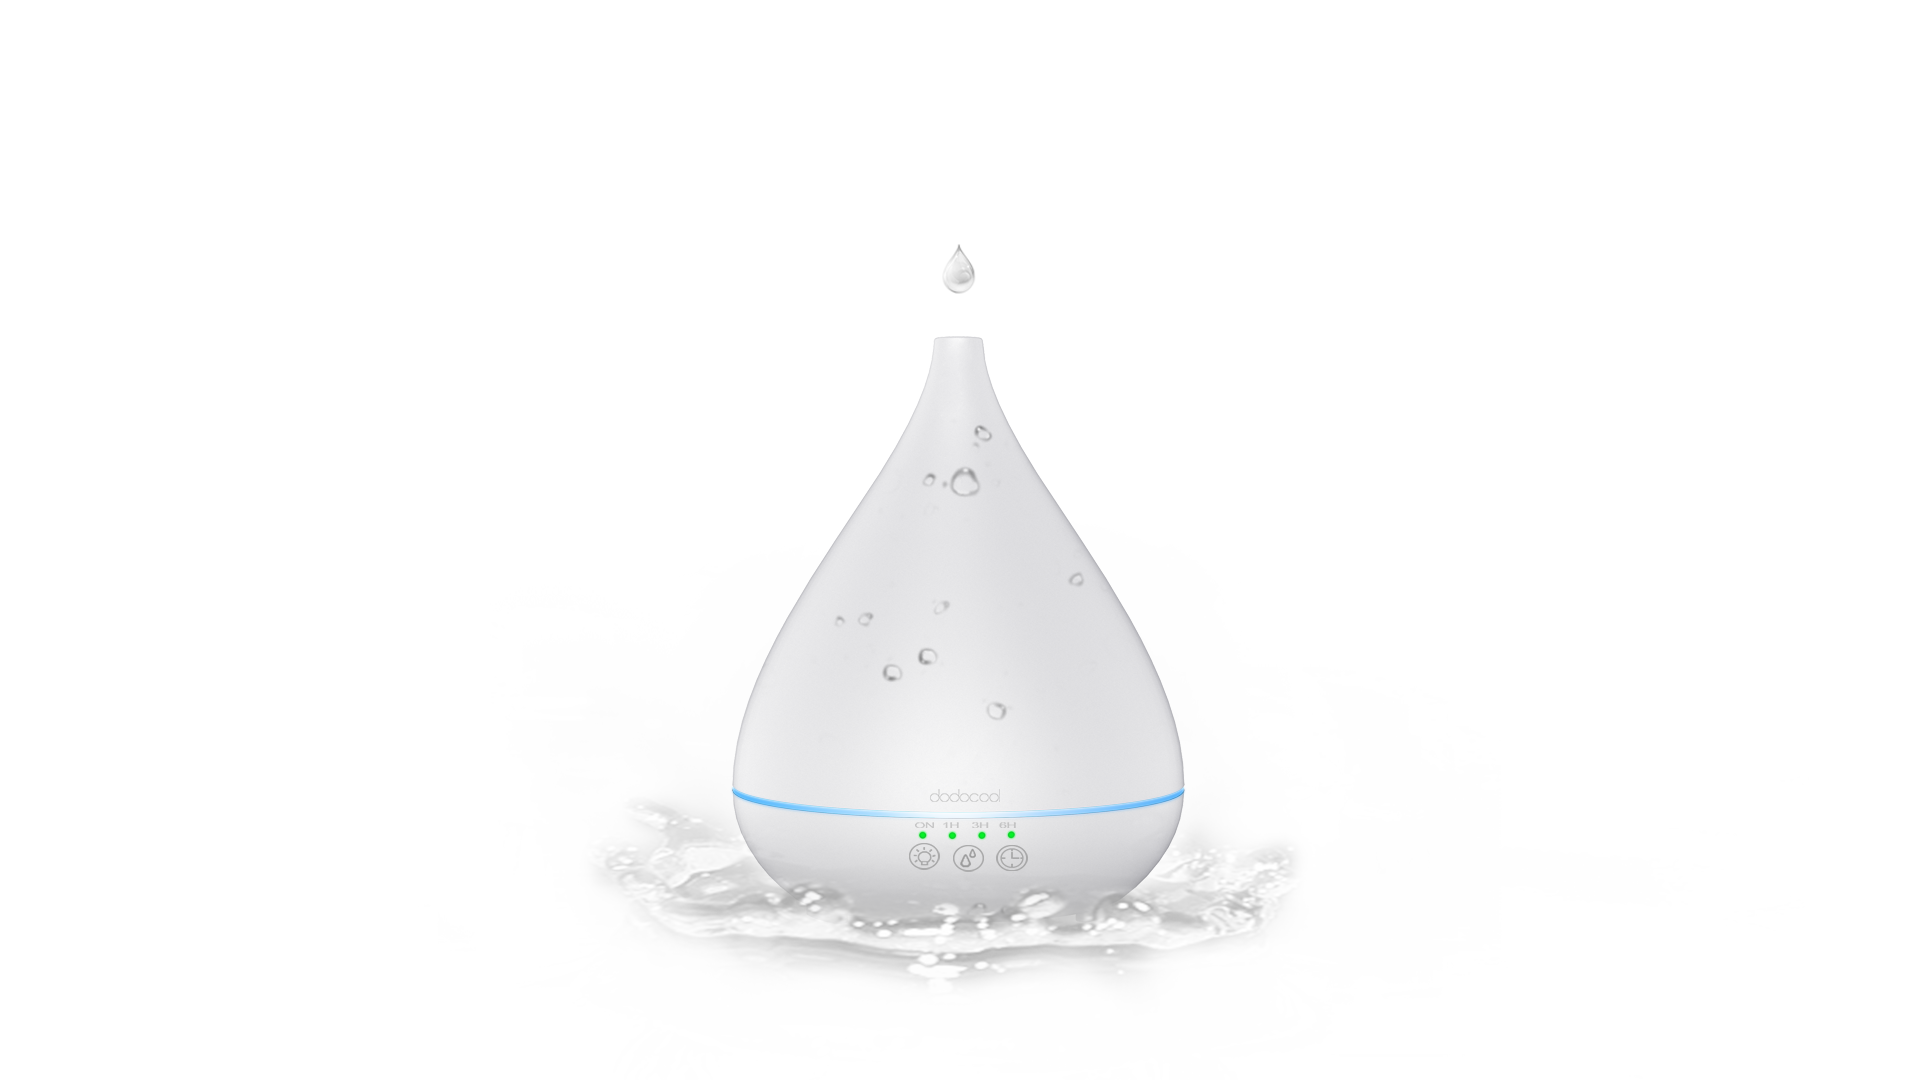 Essential Oil Diffuser Humidifier For Home: 400ml Aromatherapy Diffusers